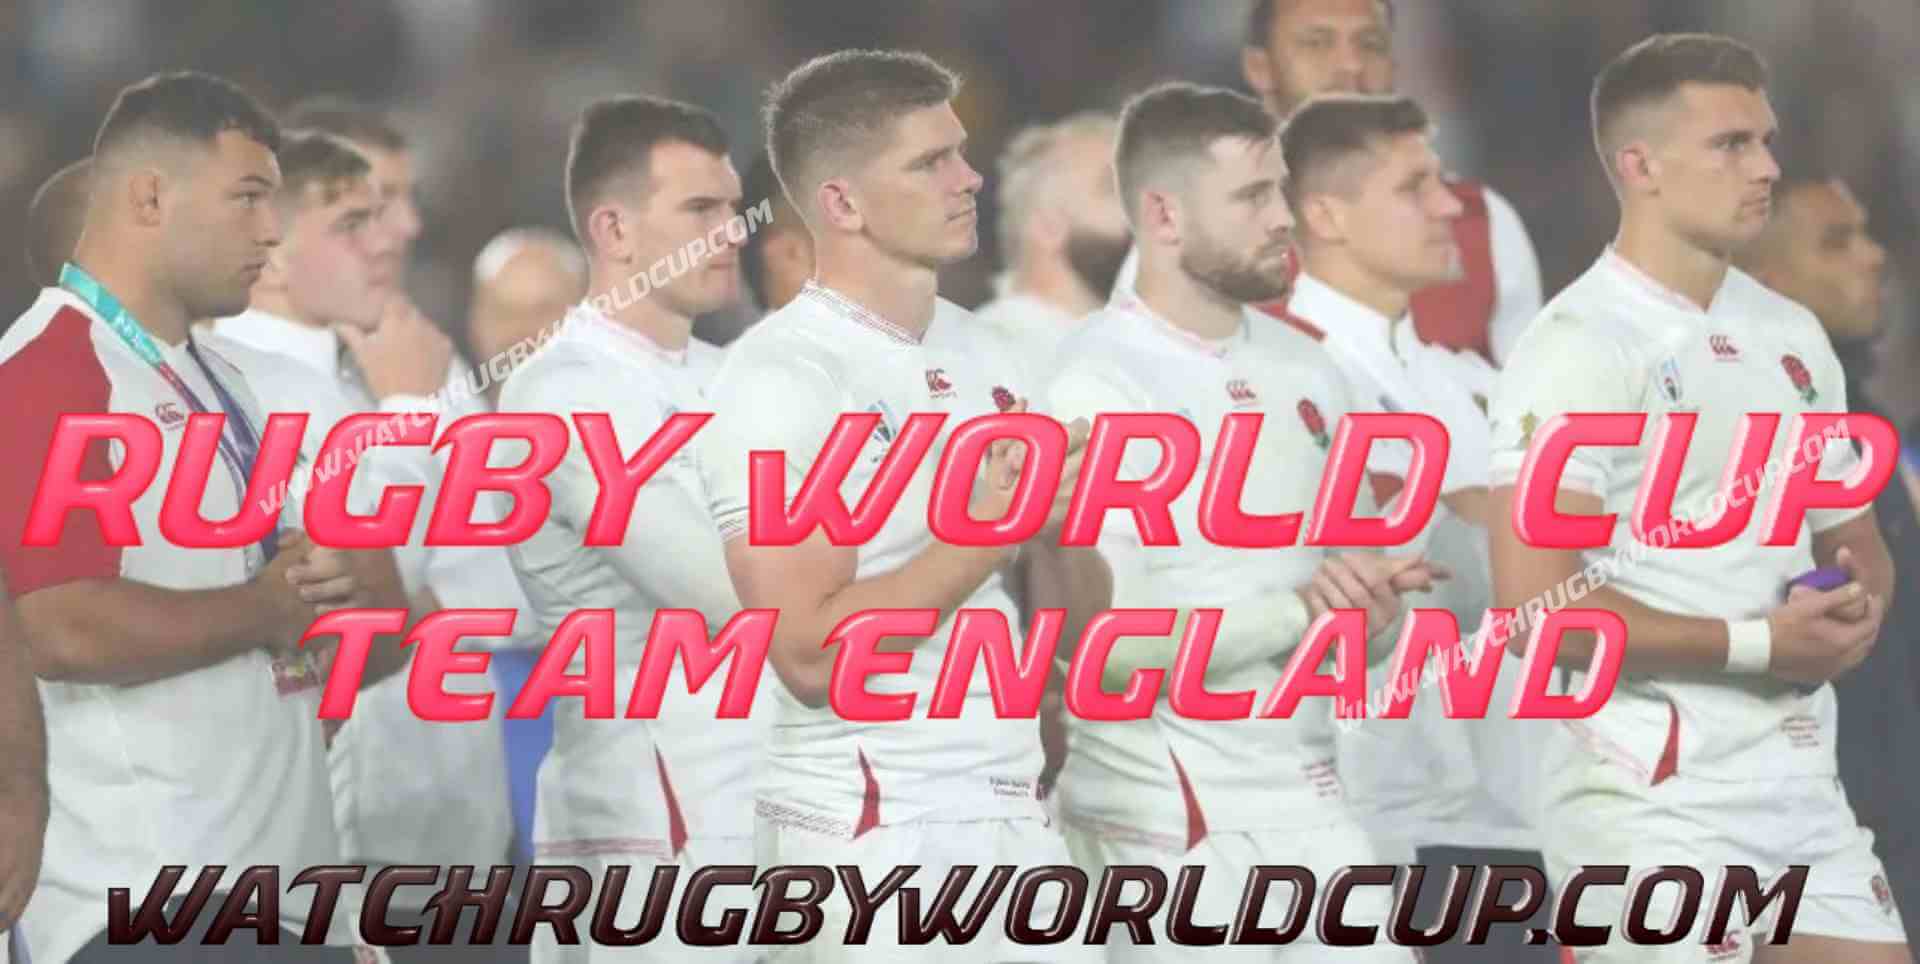 team-england-in-rugby-world-cup-live-steam